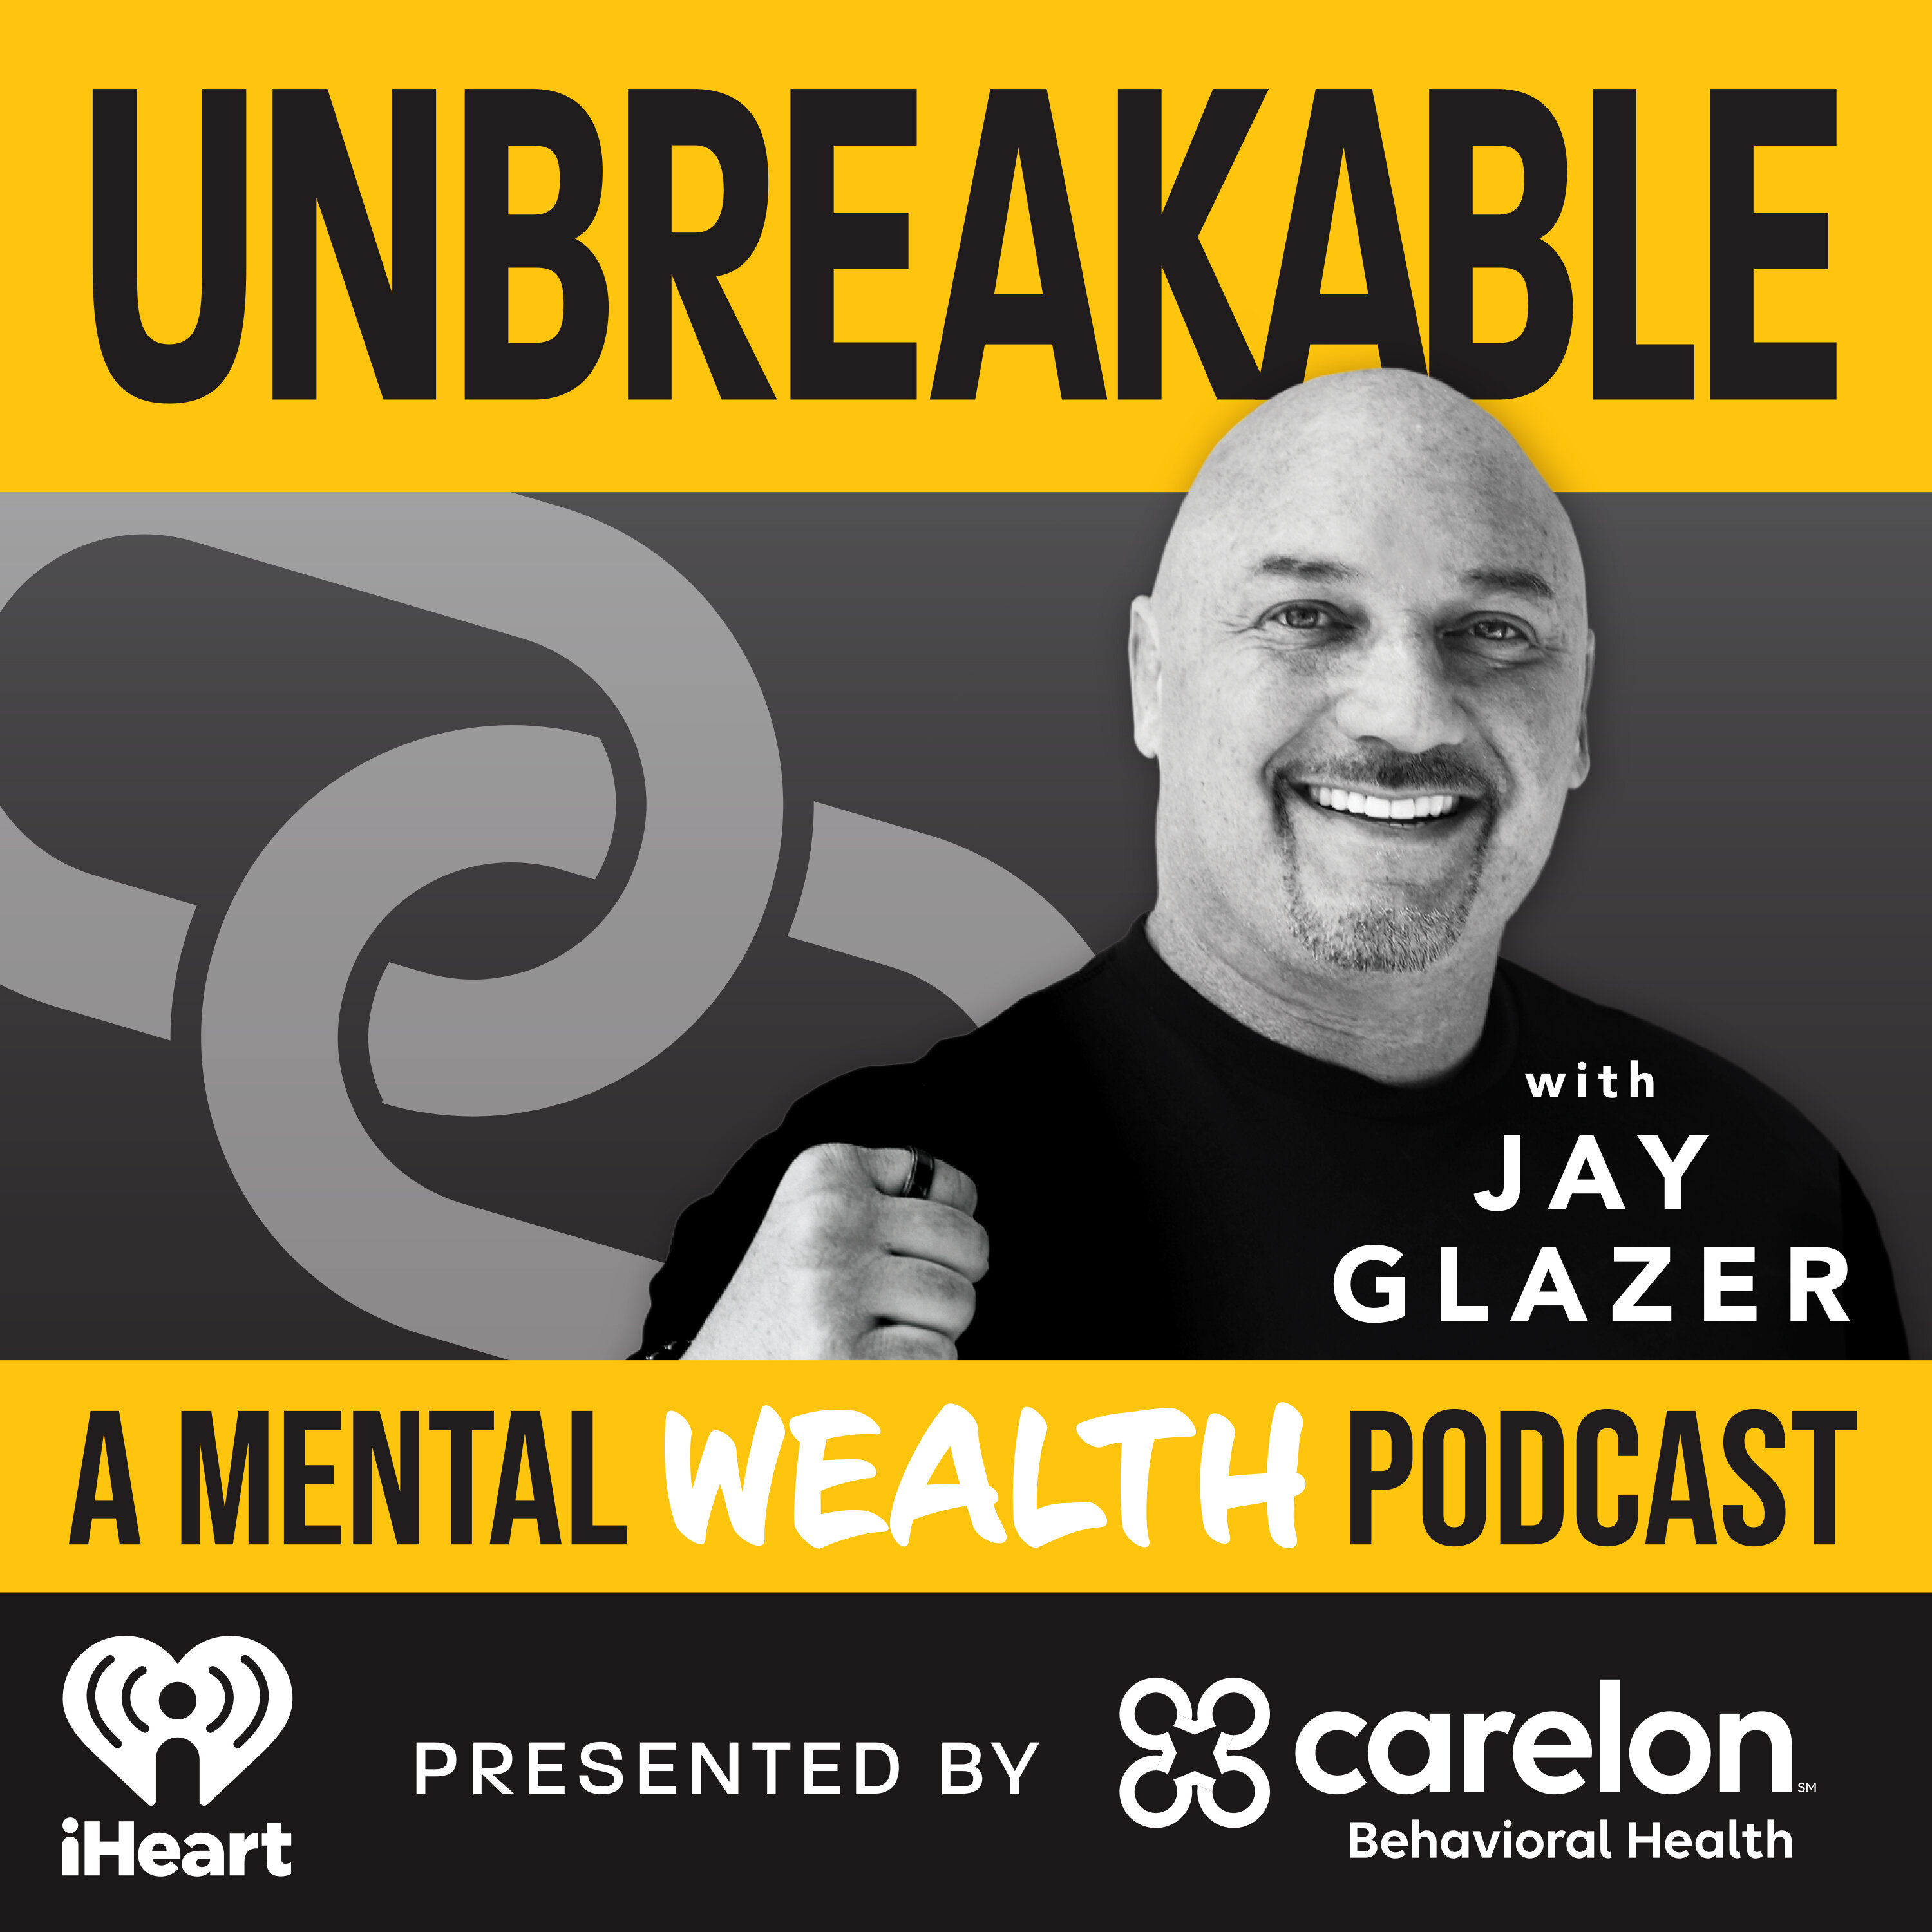 Unbreakable with Jay Glazer podcast show image